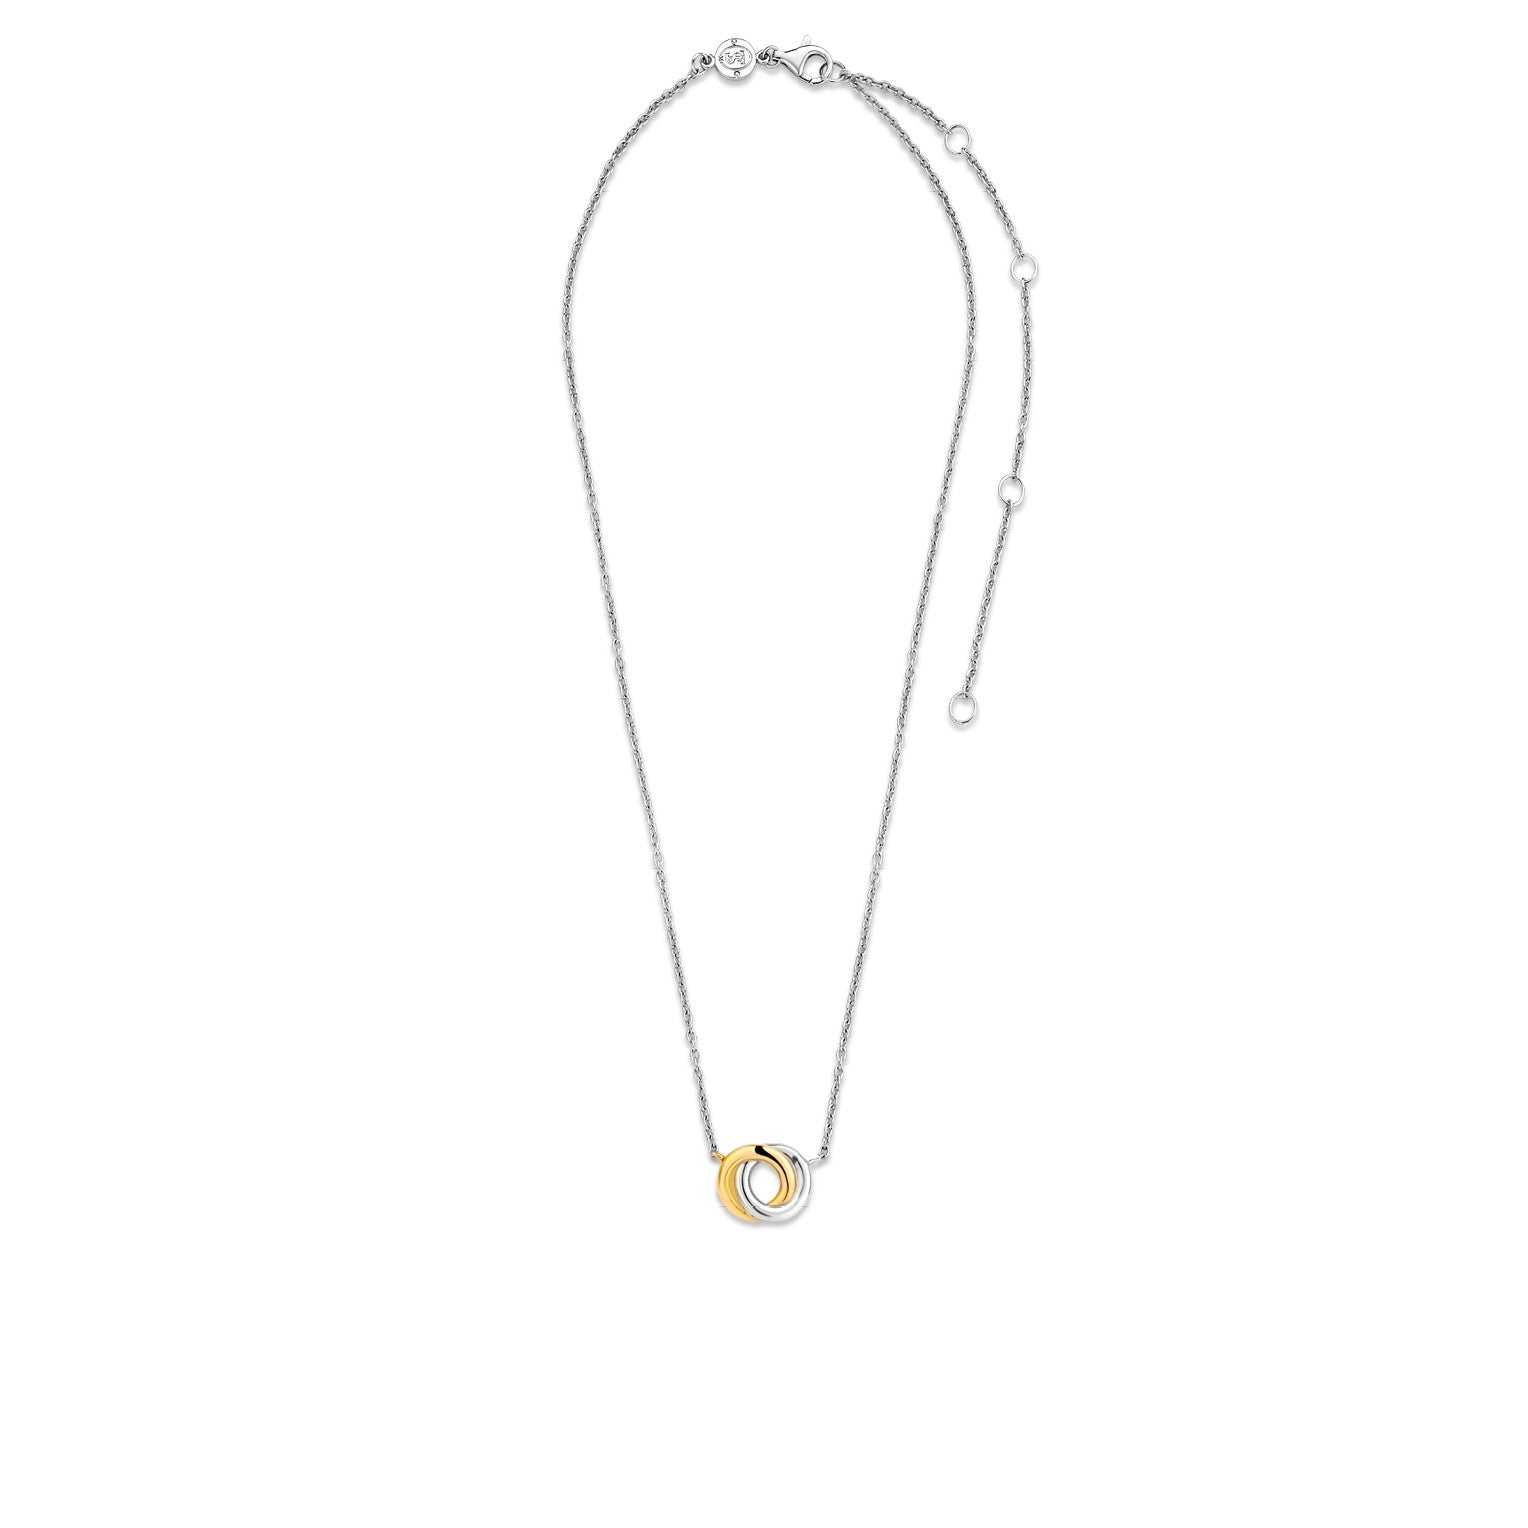 Two Tone Double Circle Necklace | The Collaborative Store